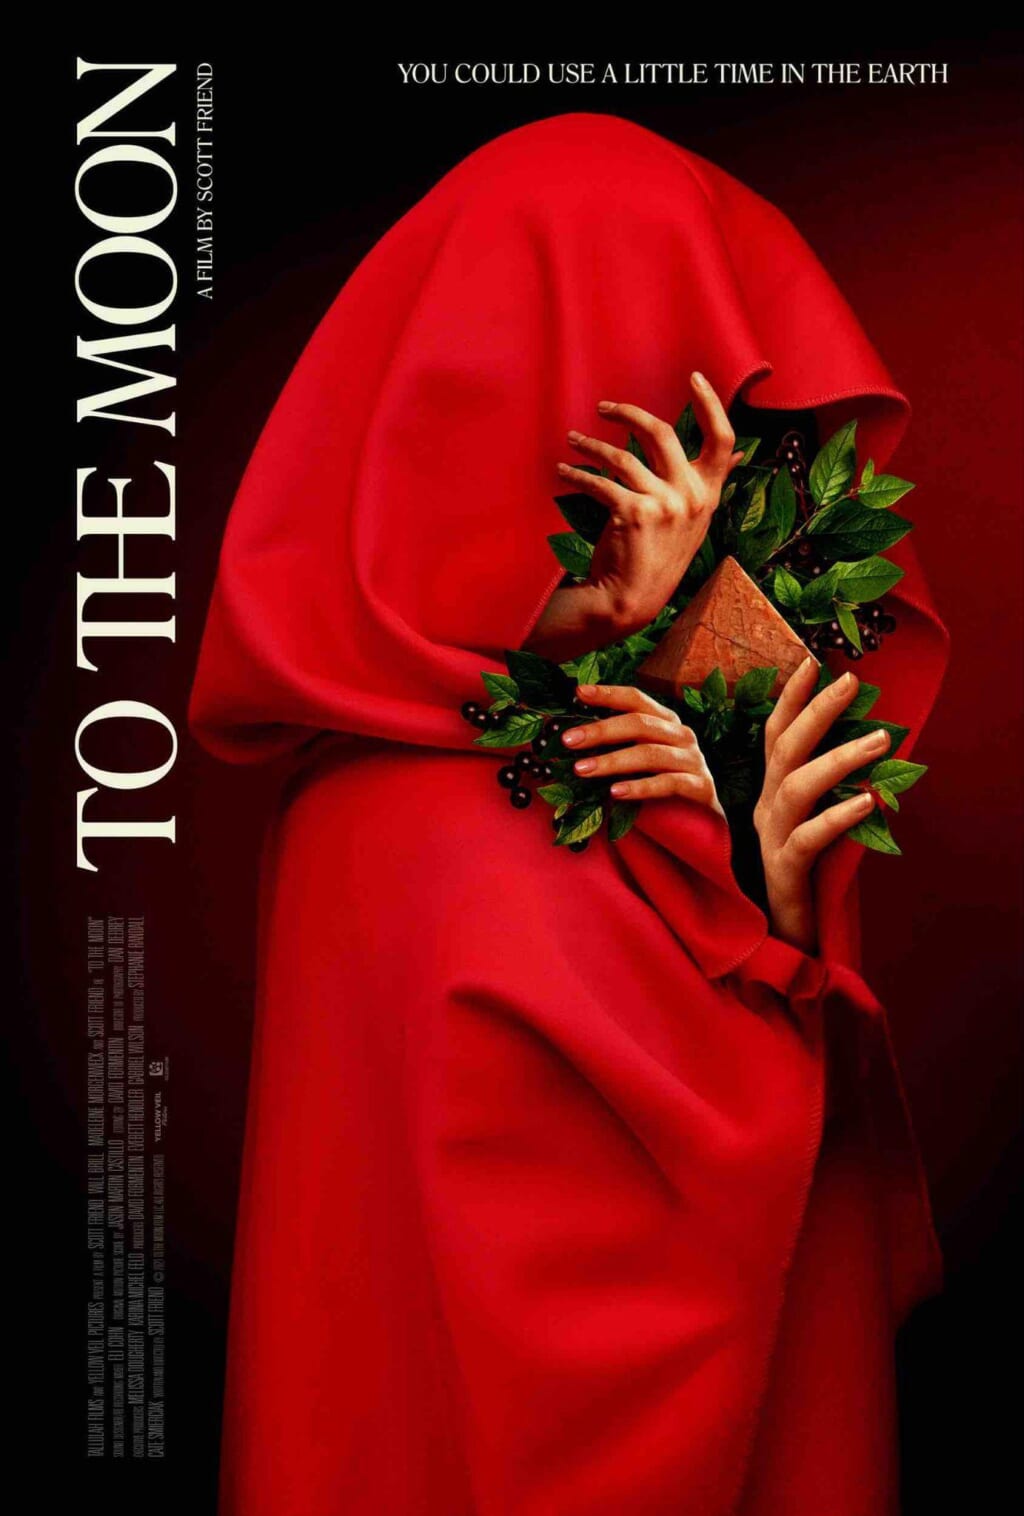 image5 1024x1516 - 'To The Moon' [Trailer]: A Hallucinogenic and Disturbing Descent Into Hell